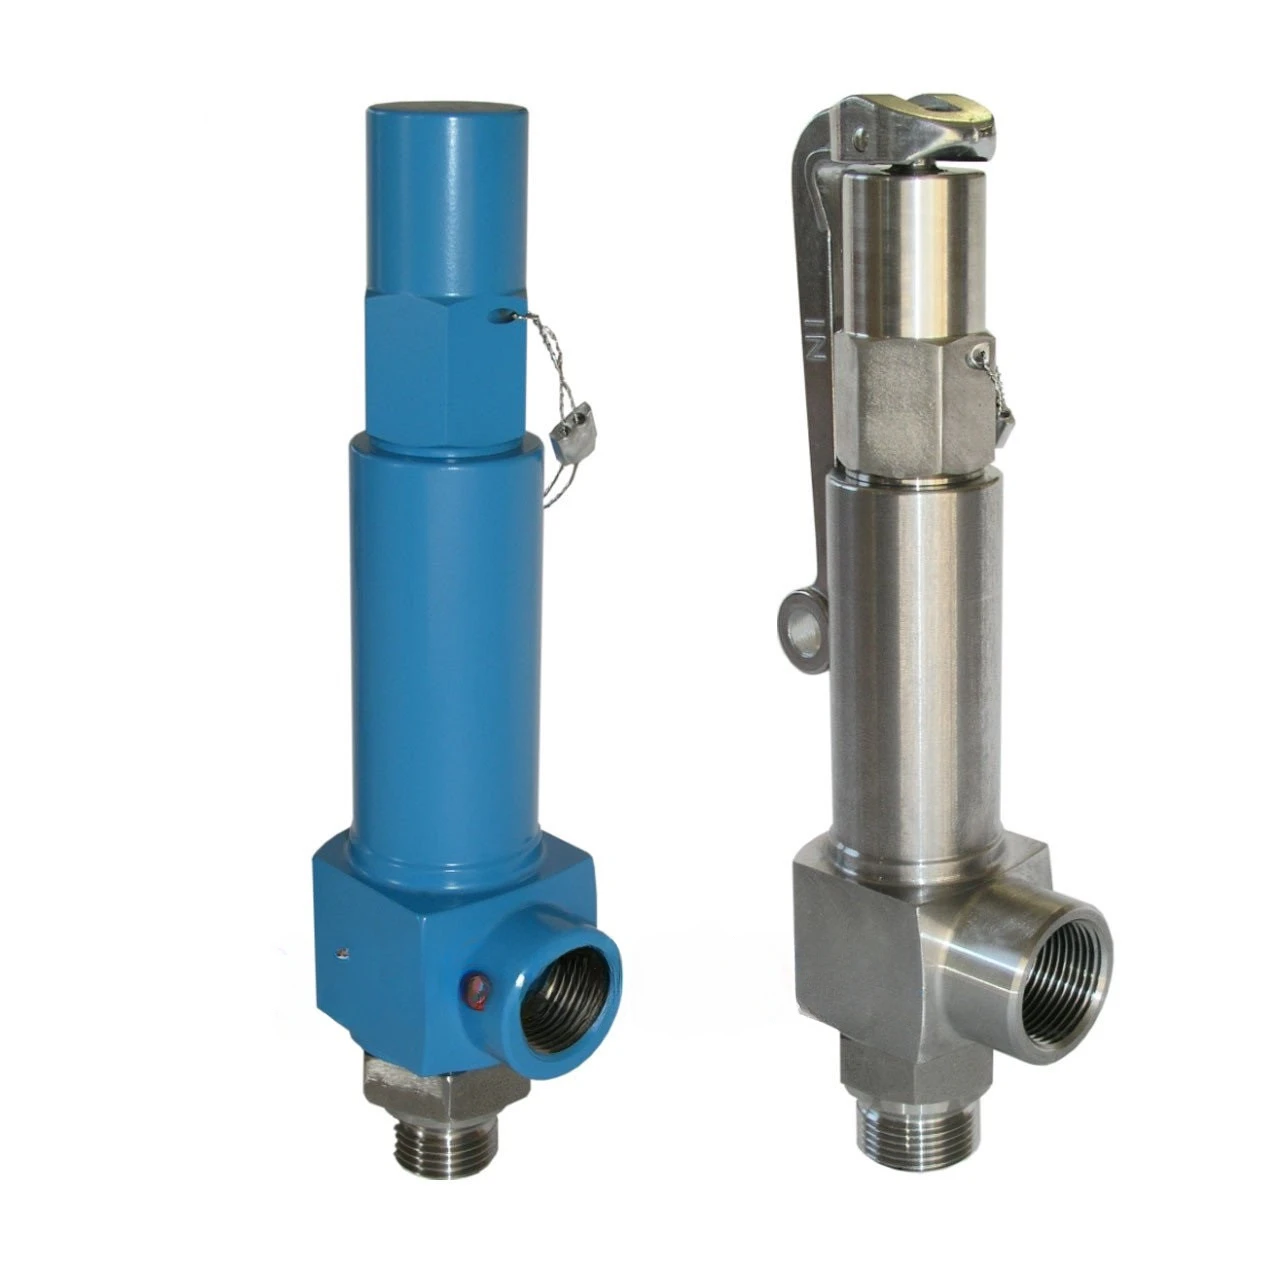 

Imported Safety Relief Valve Typ 14 for Niezgodka Valve